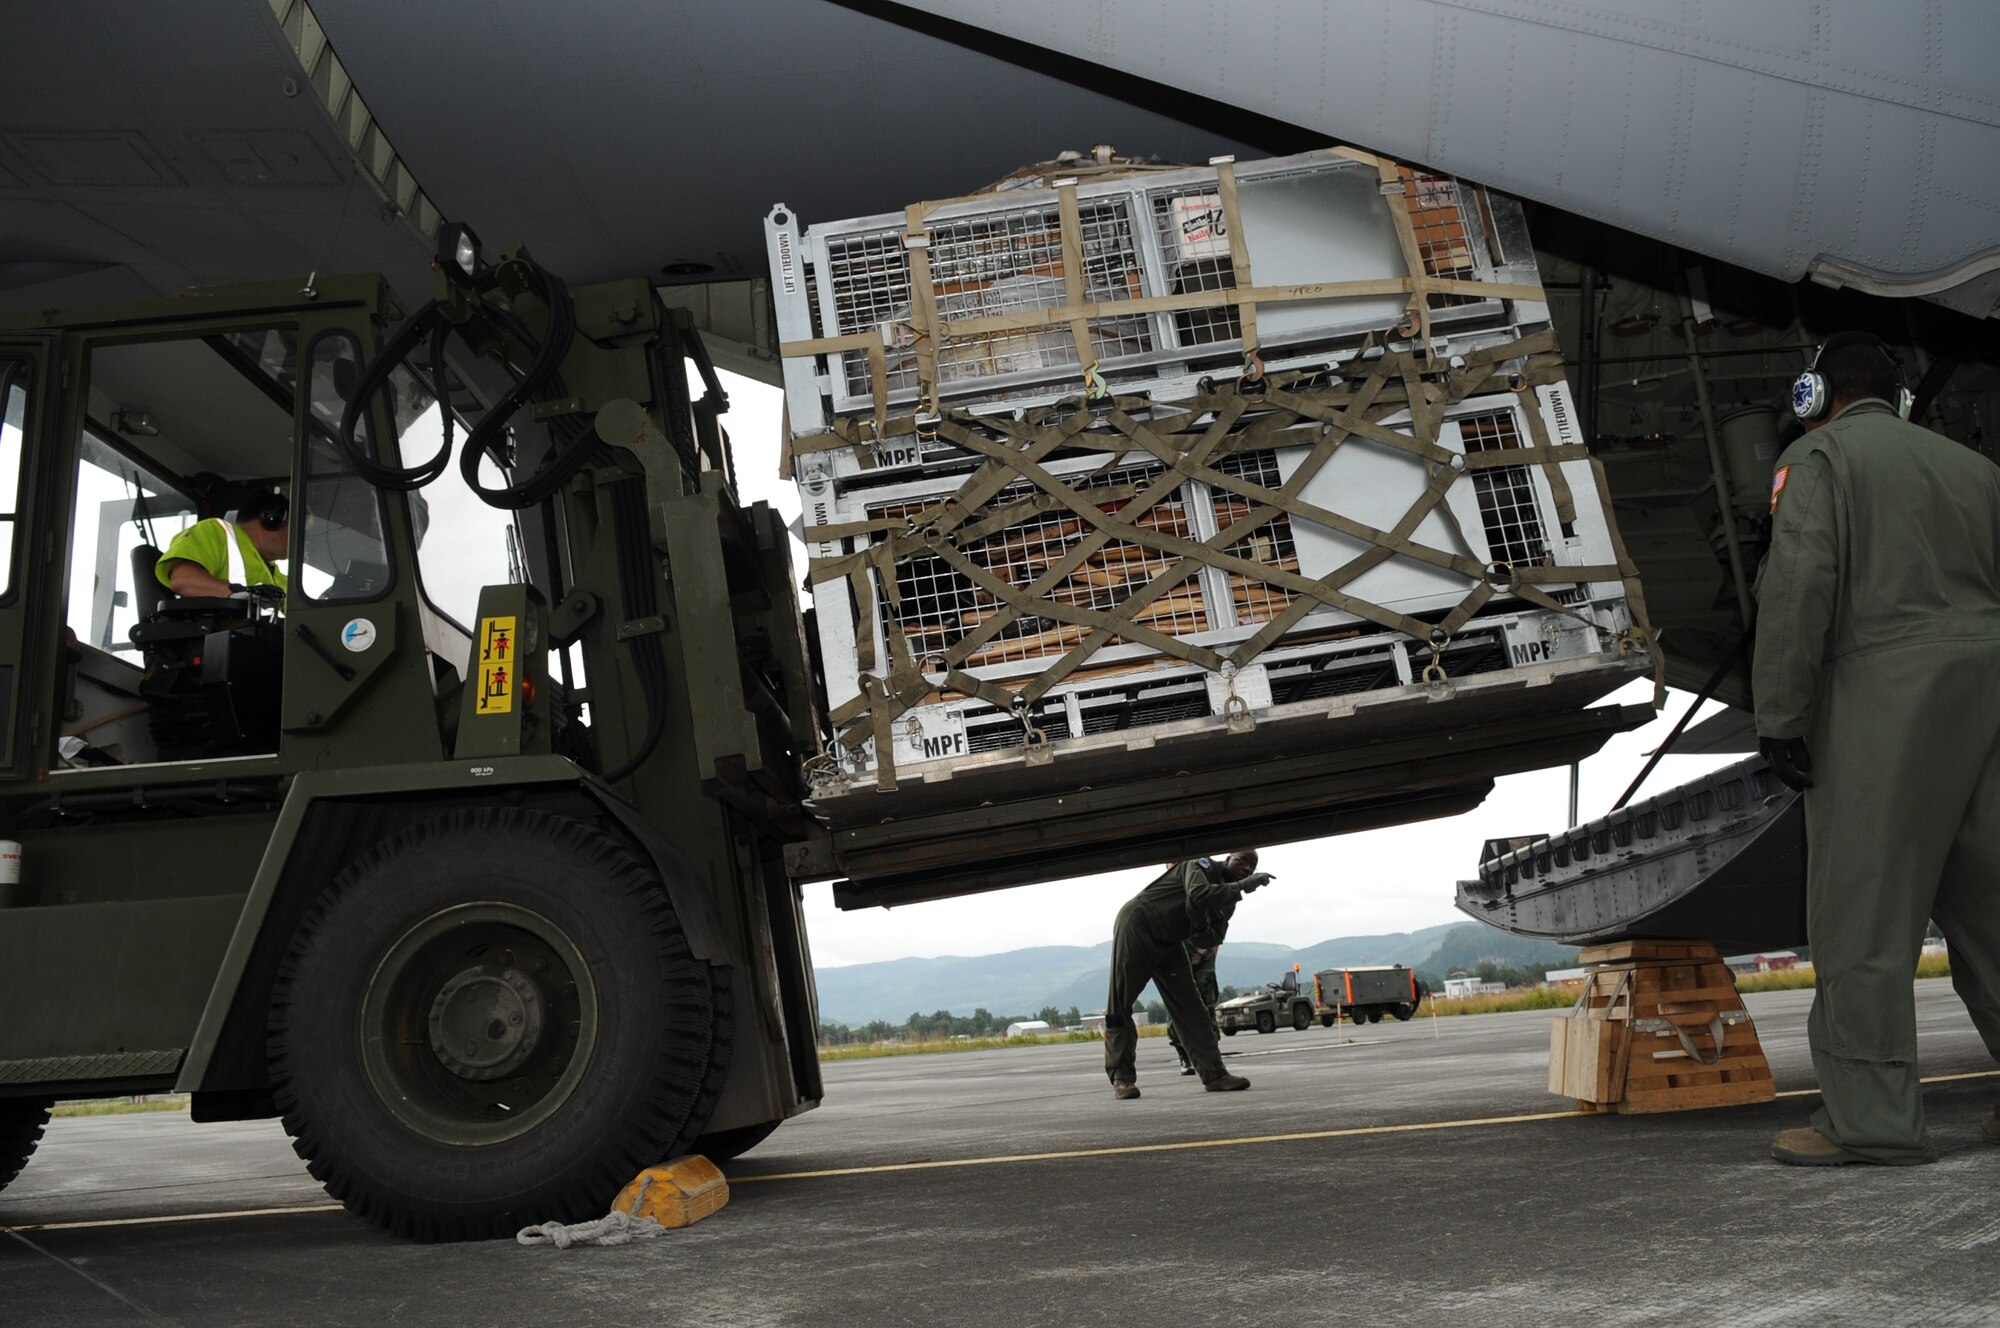 Military members from U.S. European Command, U.S. Air Forces in Europe, 37th Airlift Squadron and Norwegian flightline workers load firefighting and humanitarian supplies on to a C-130J at Trondheim Airport, Norway, Aug. 14, 2010. The supplies are being delivered to Moscow after an official request from the Russian government to the U.S. and at the request of the Department of State. The Department of Defense directed EUCOM to provide valuable firefighting equipment that includes firefighting protective equipment and tools to help Russia combat the ongoing wildfires. (U.S. Army photo by Staff Sgt. Lawree R. Washington Jr.)